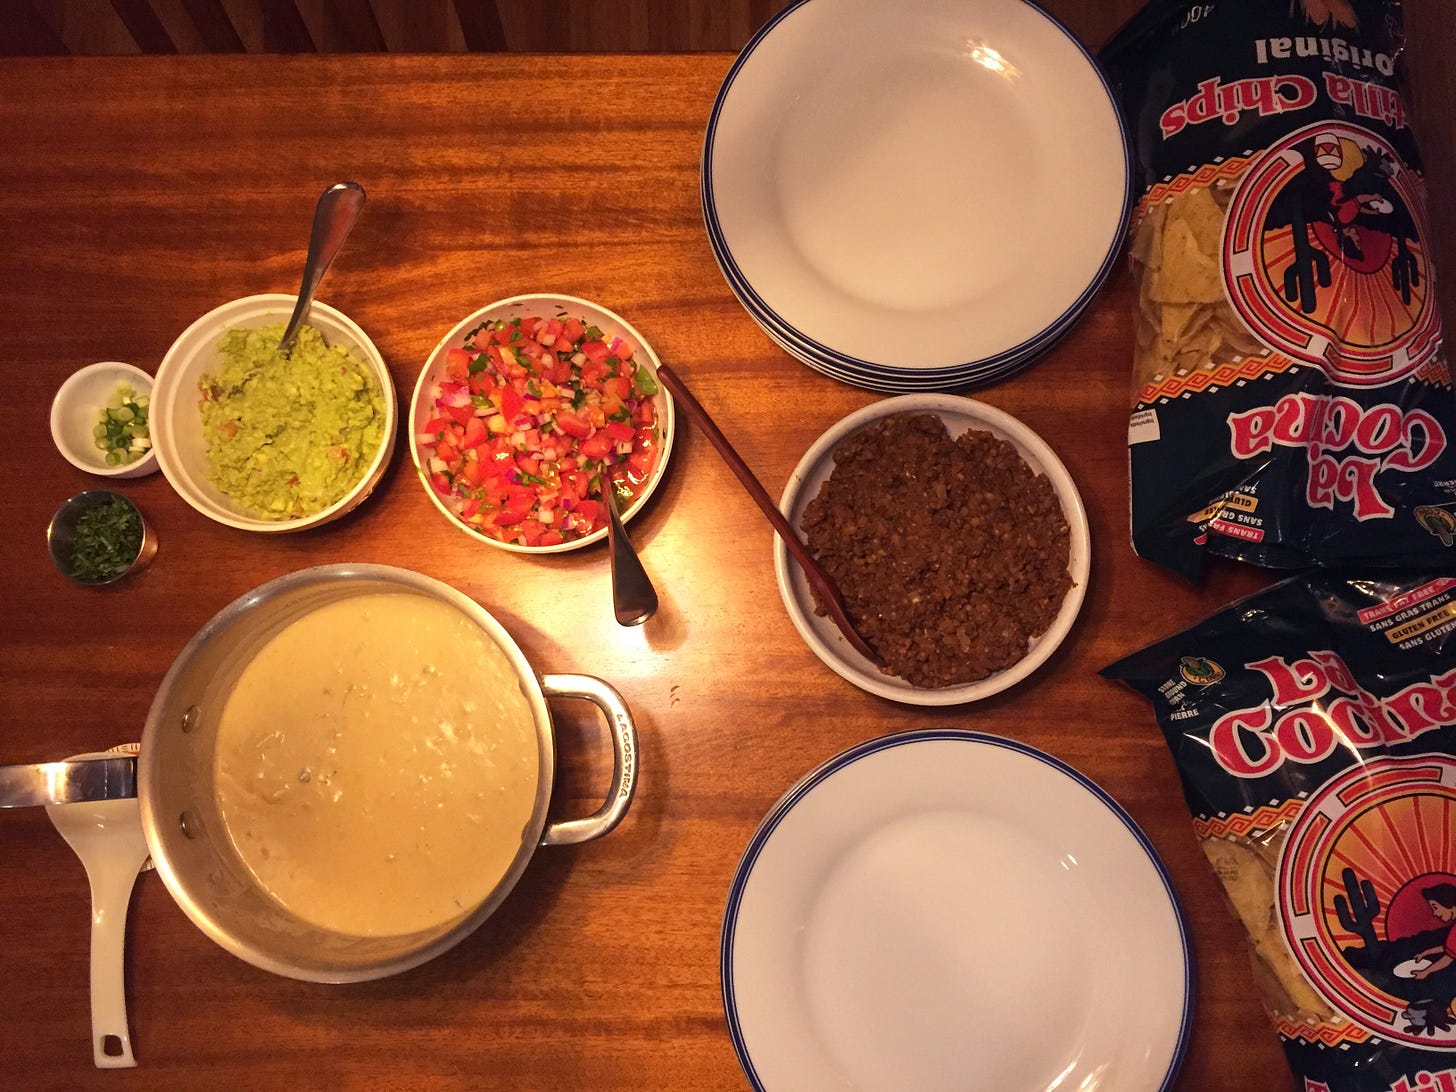 From above, a table full of nacho fixings: bags of chips on the right, two stacks of plates with a bowl of lentil meat in between them, a pot of queso with a spoon beside it, and above the pot, bowls with pico de gallo, guacamole, chopped cilantro, and green onions.